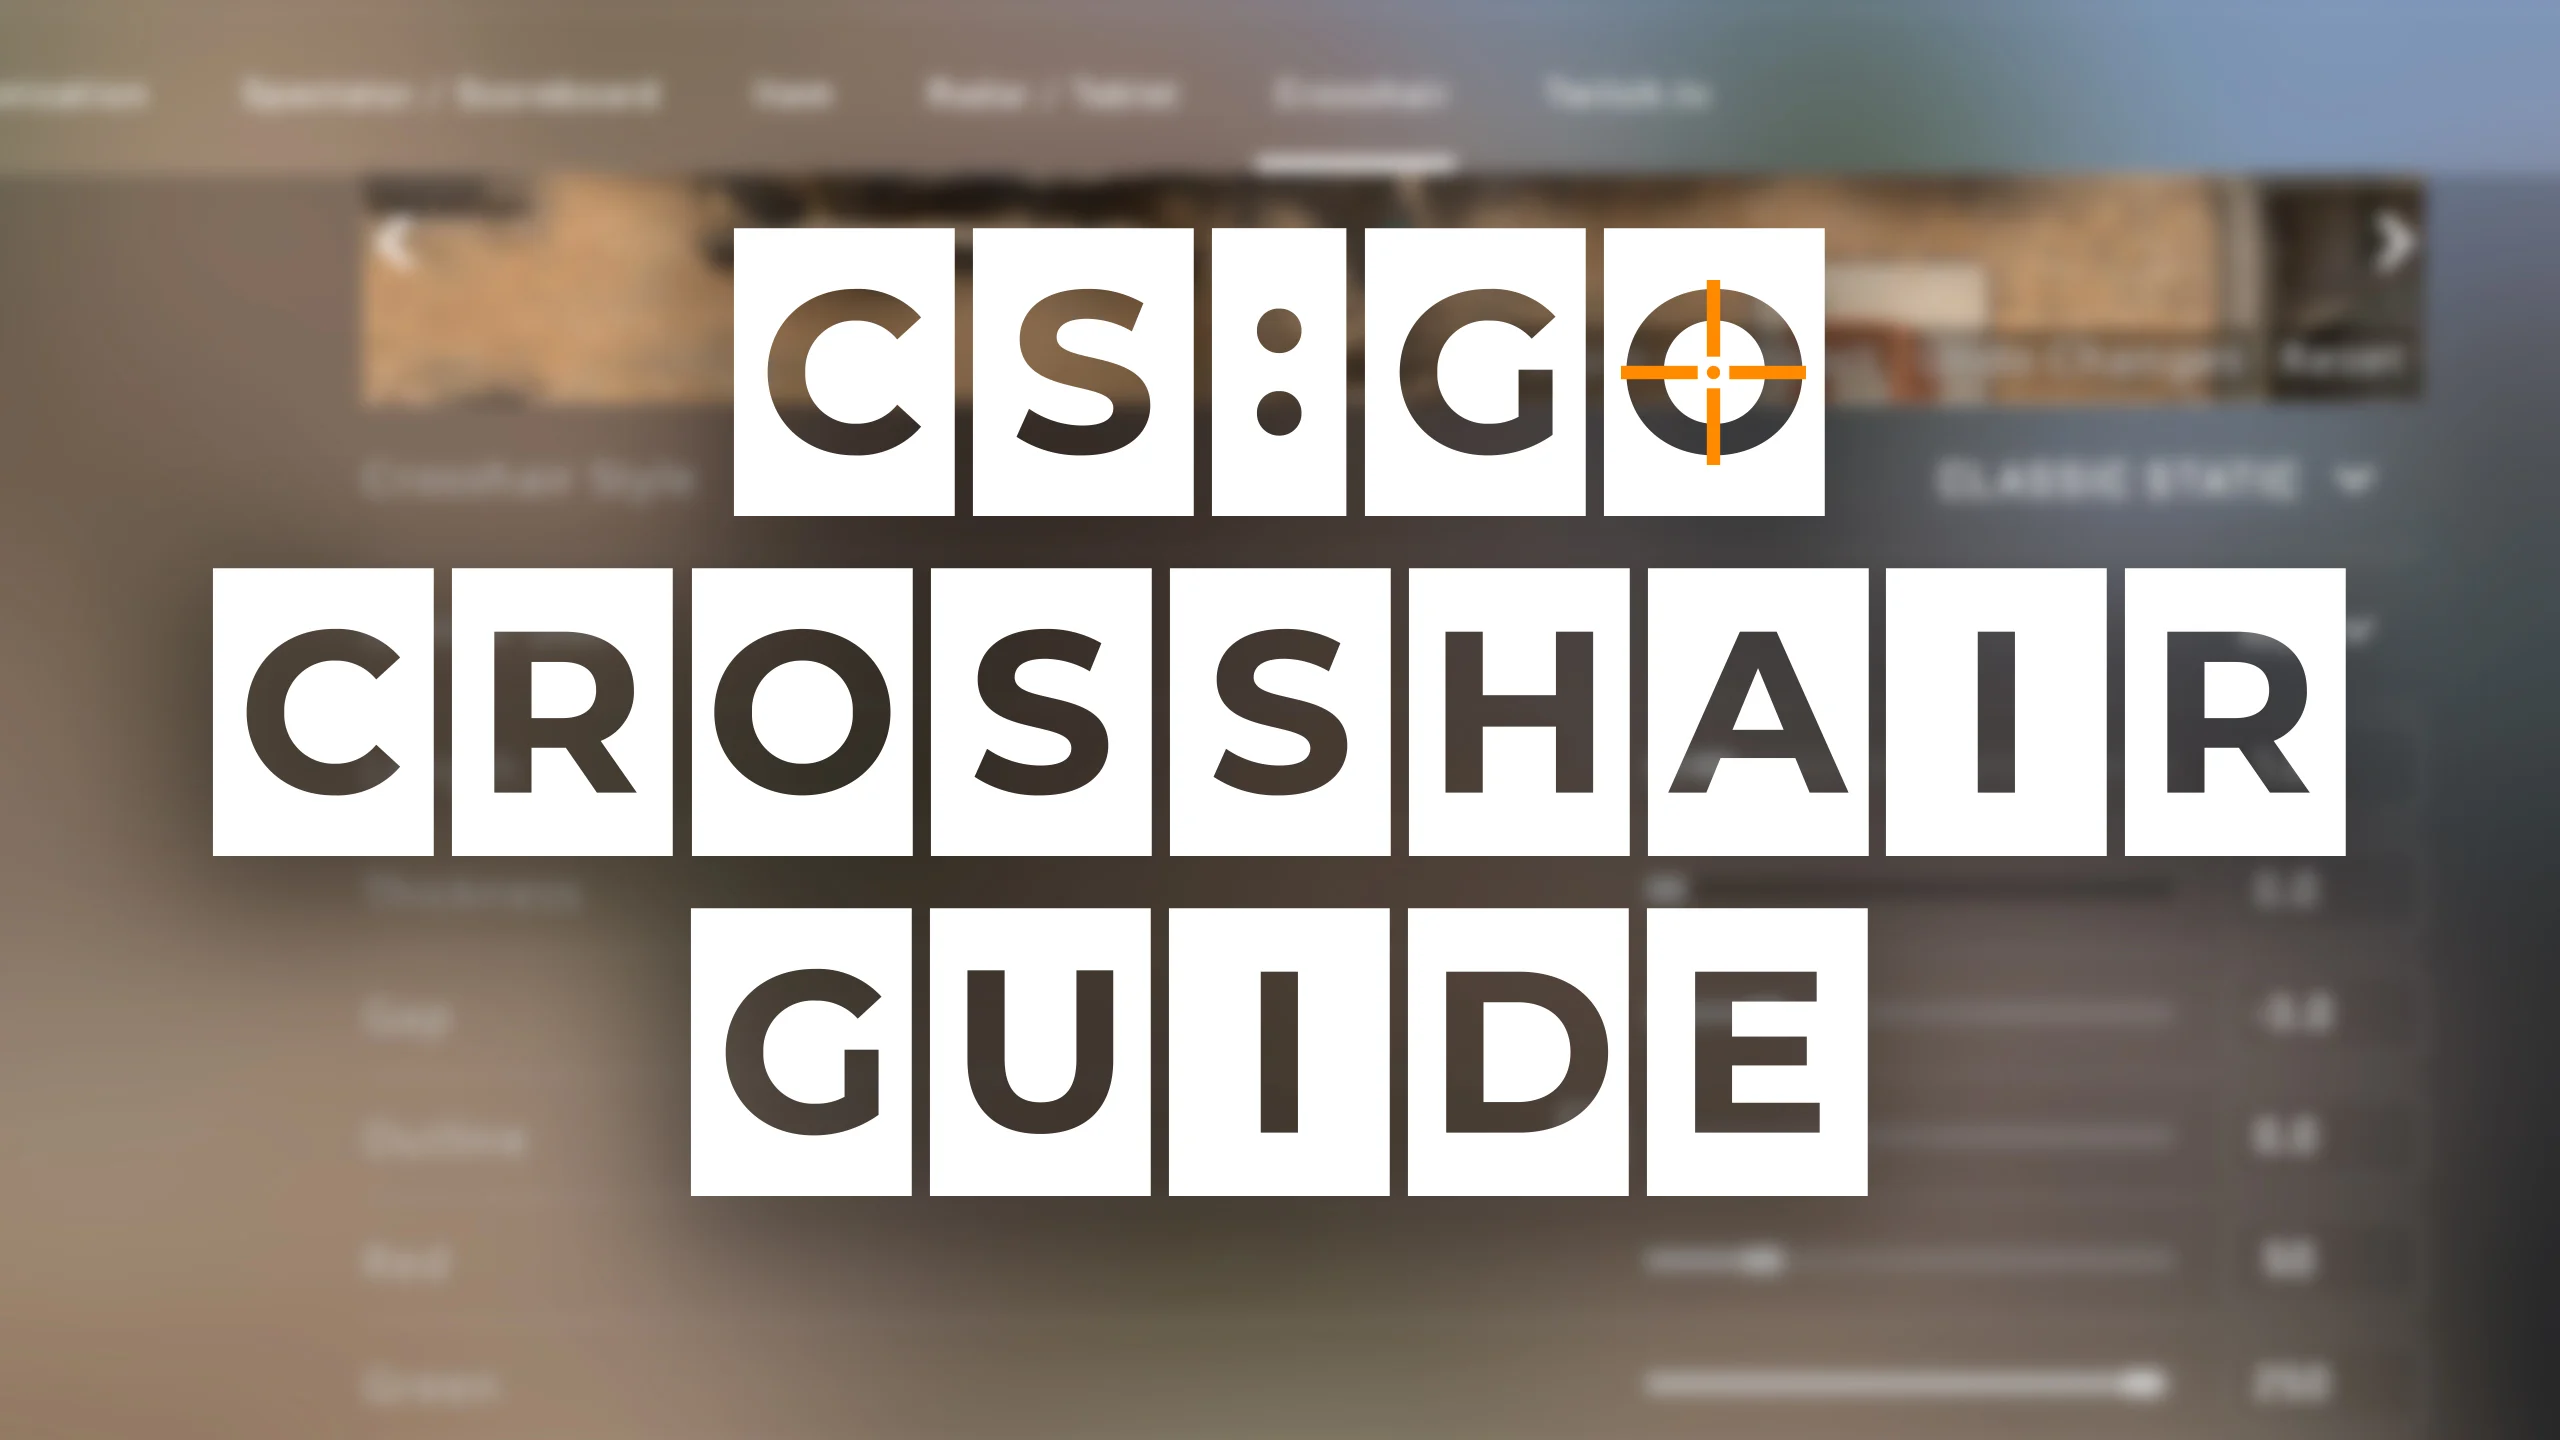 The only CS:GO Crosshair Guide you'll ever need